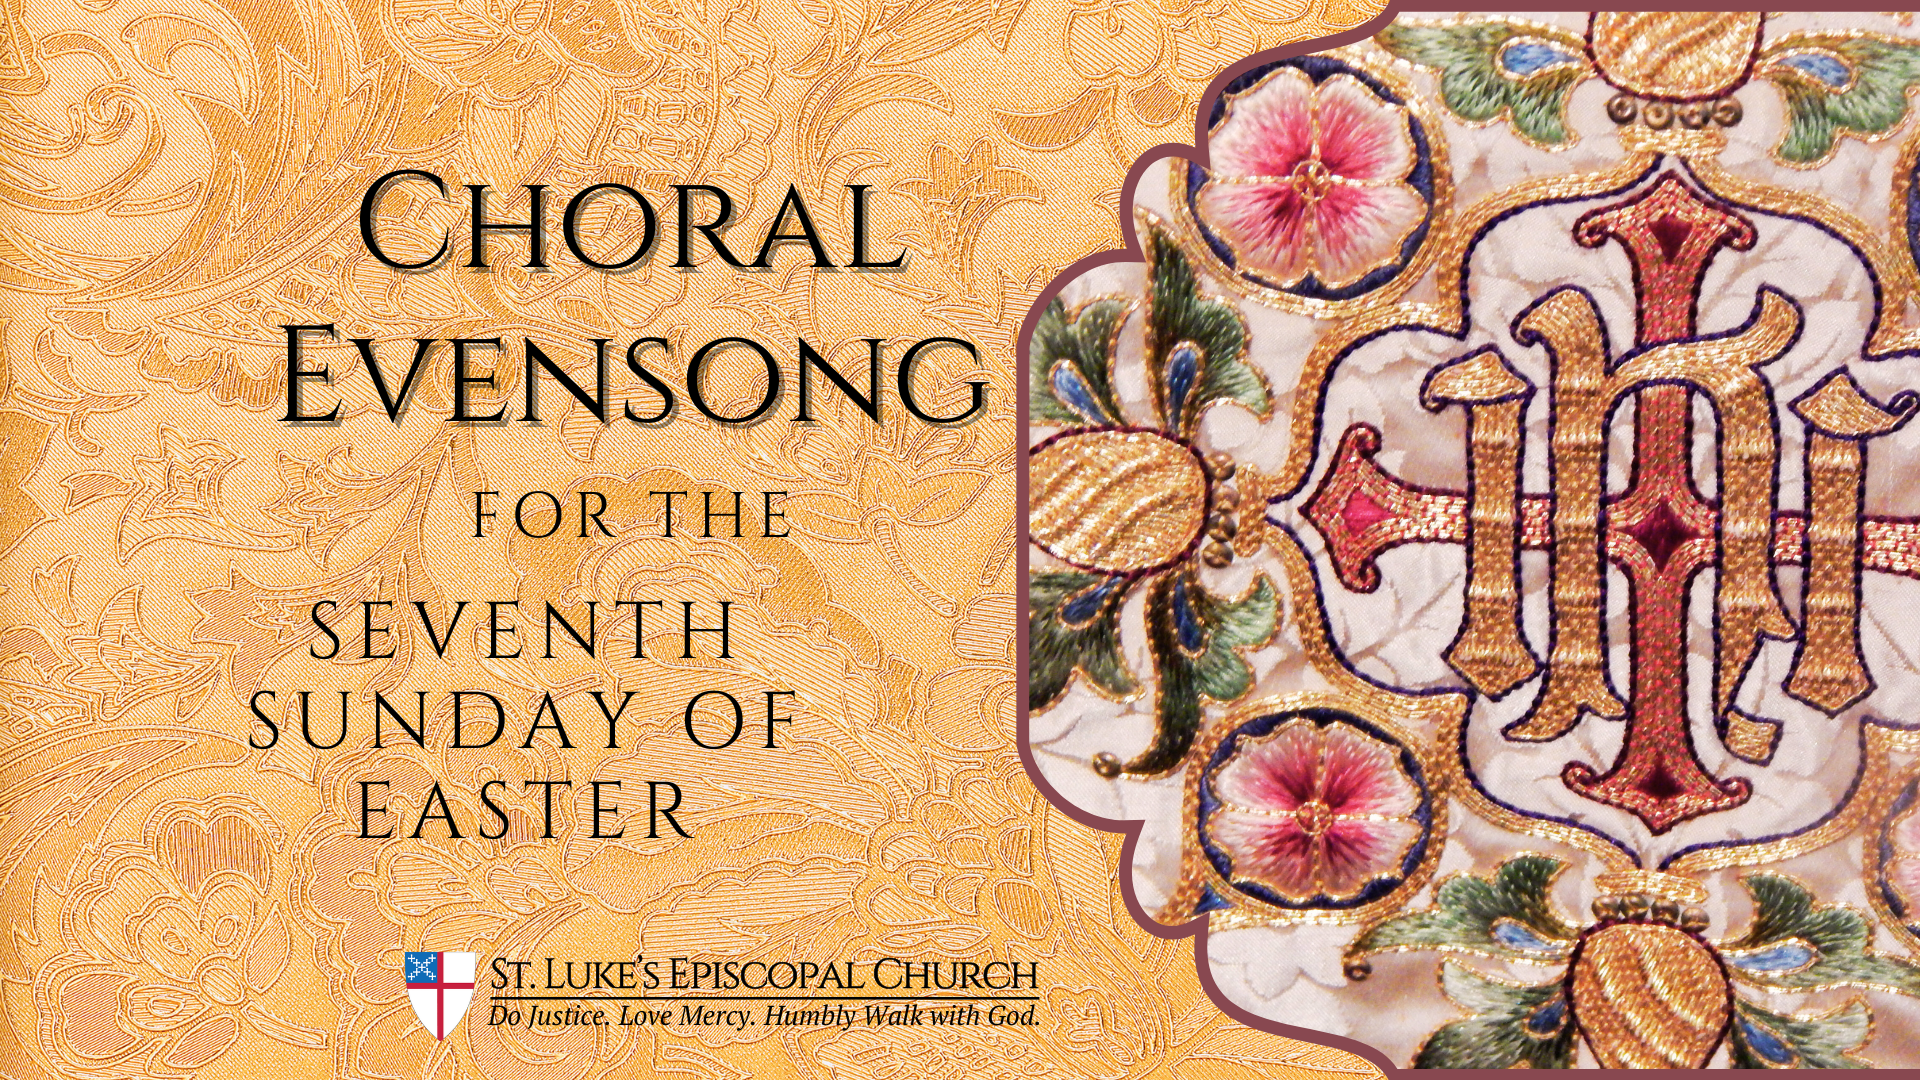 choral evensong for the 7th sunday of easter